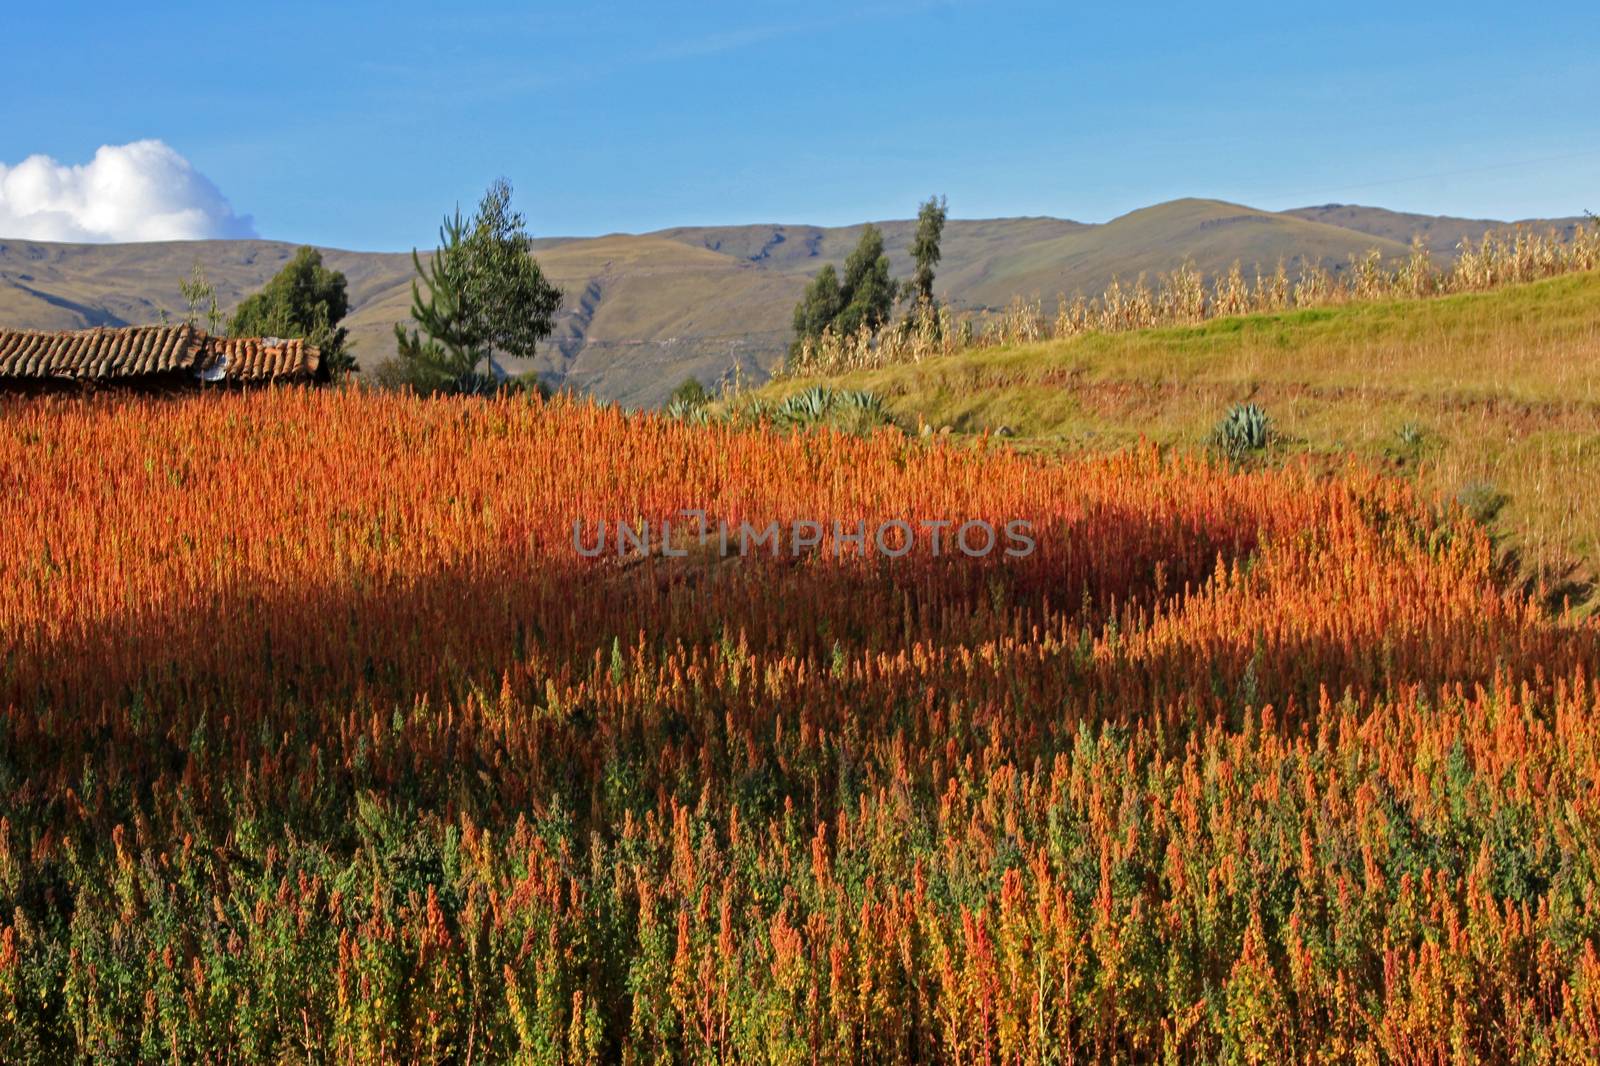 Red and yellow quinoa field in the andean highlands of Peru near Cusco